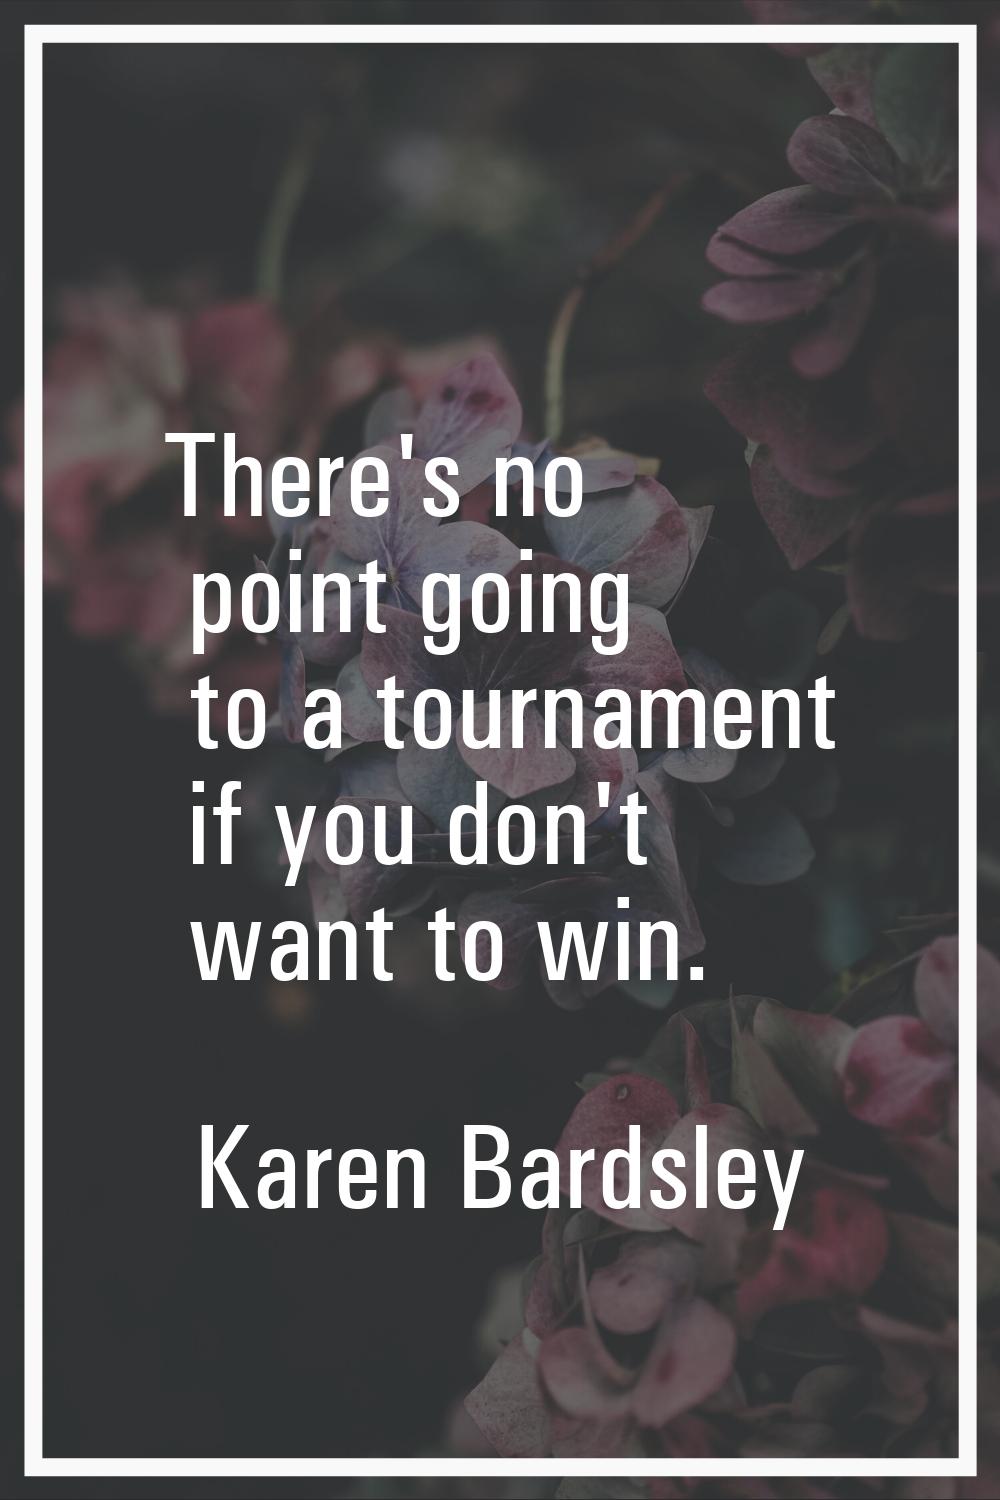 There's no point going to a tournament if you don't want to win.